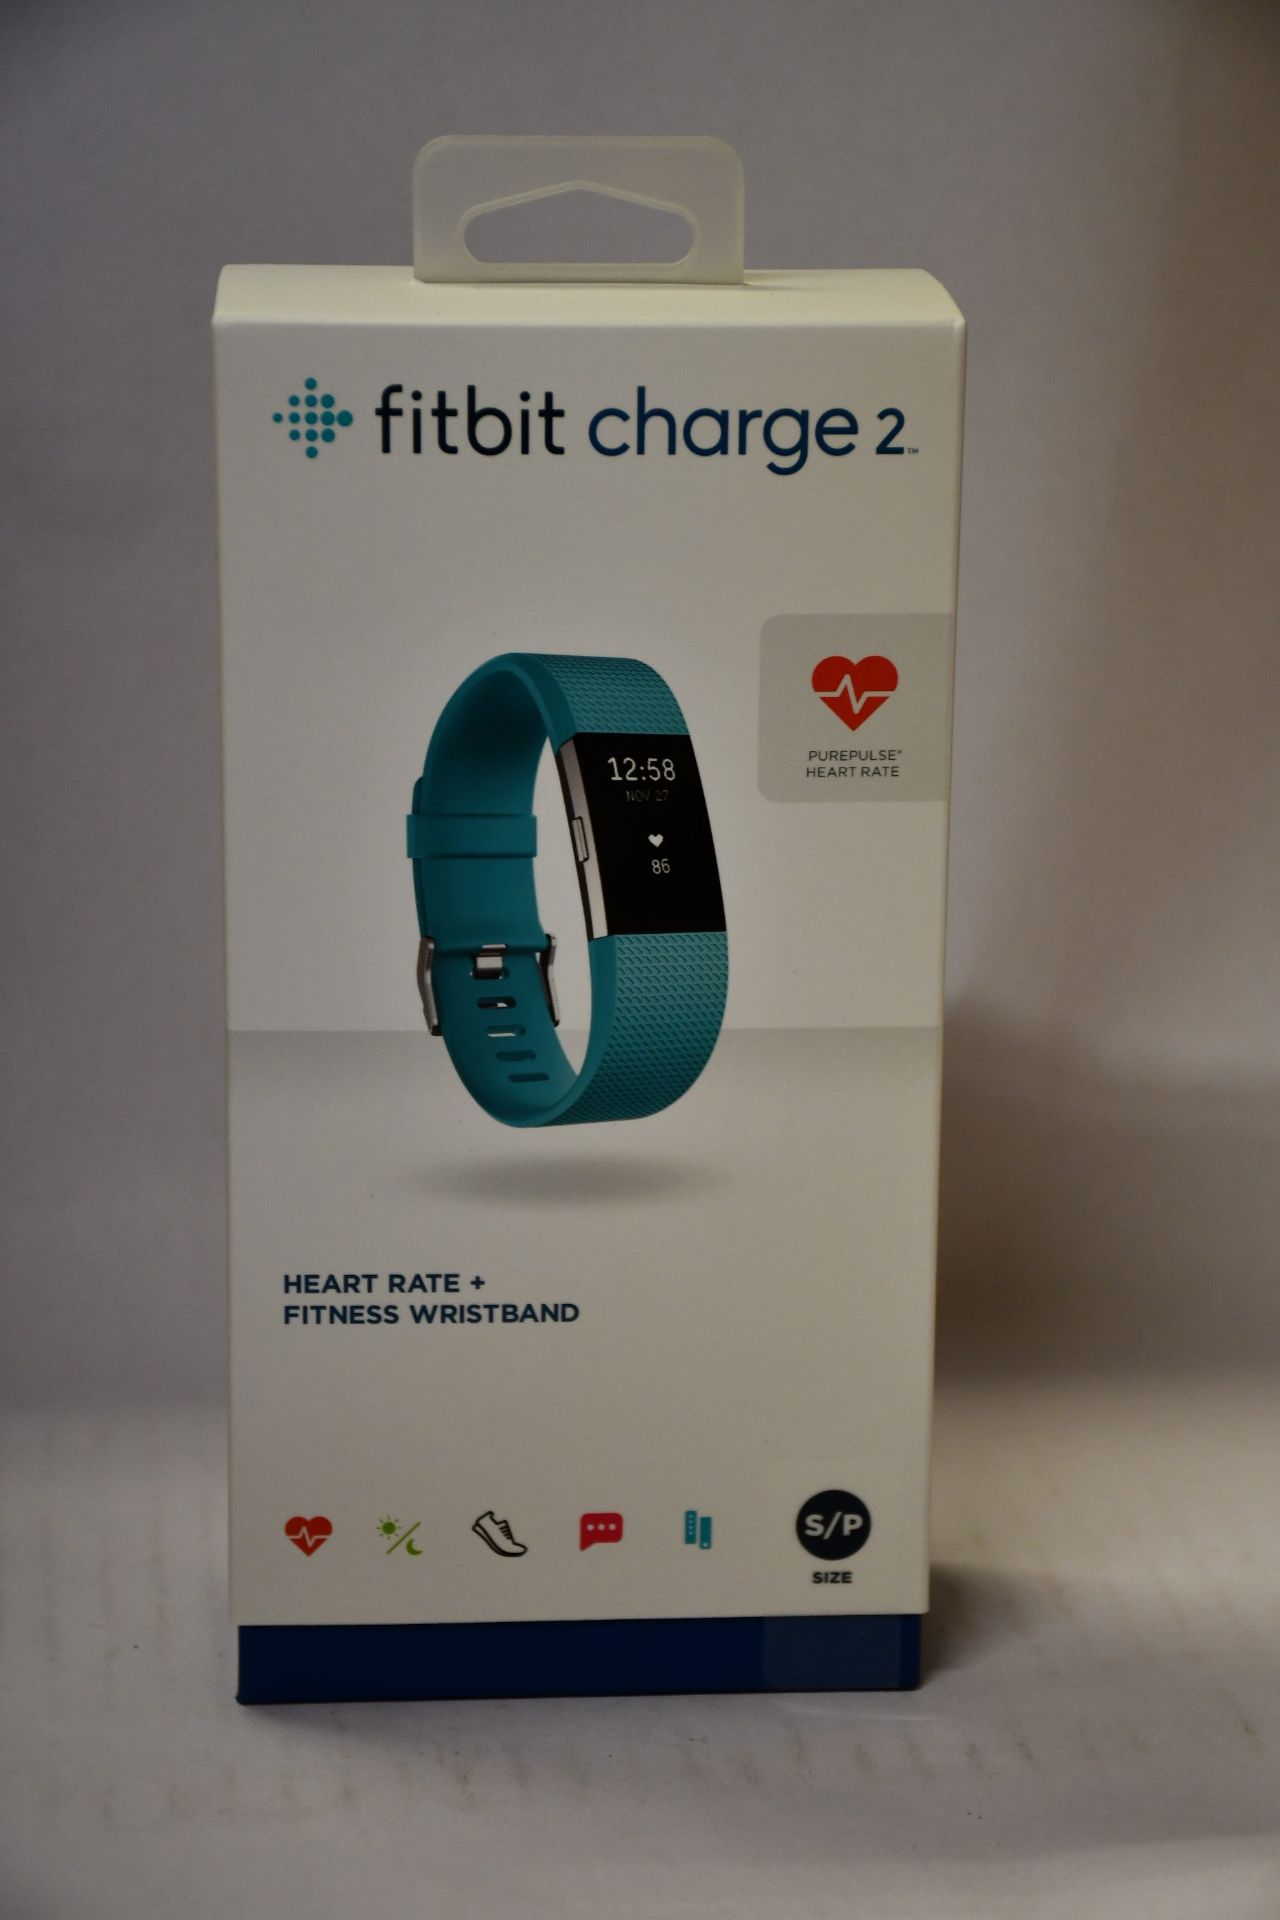 A boxed a new Fitbit Charge 2 heart rate and fitness band (Stainless steel/teal).